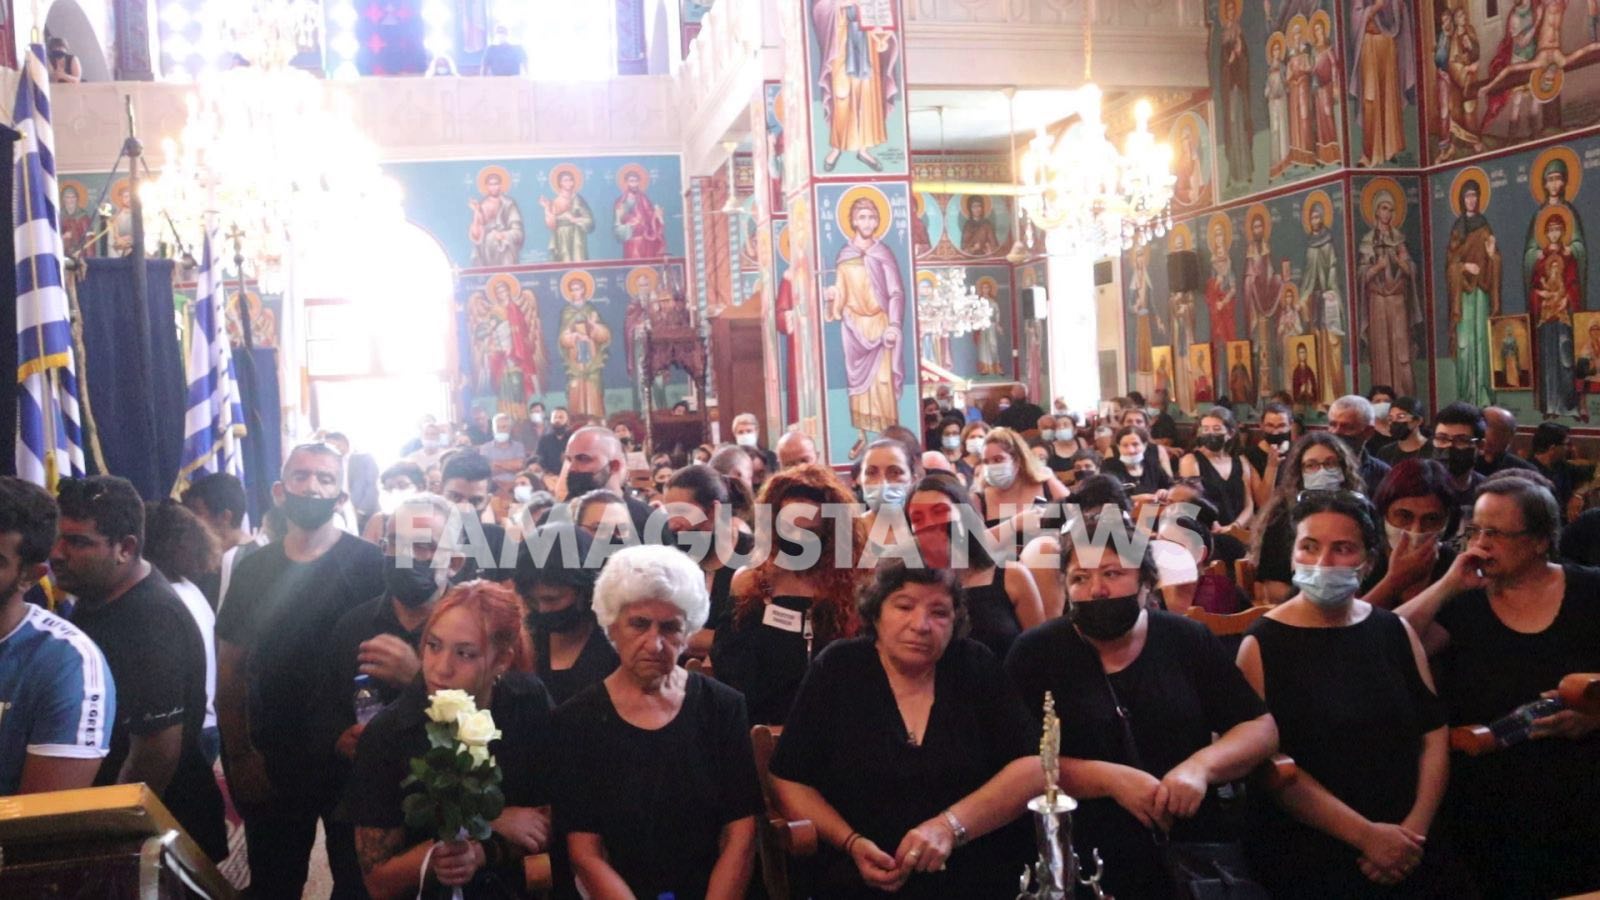 Viber image 2021 07 17 15 22 23 665 exclusive, Funeral of Missing Person